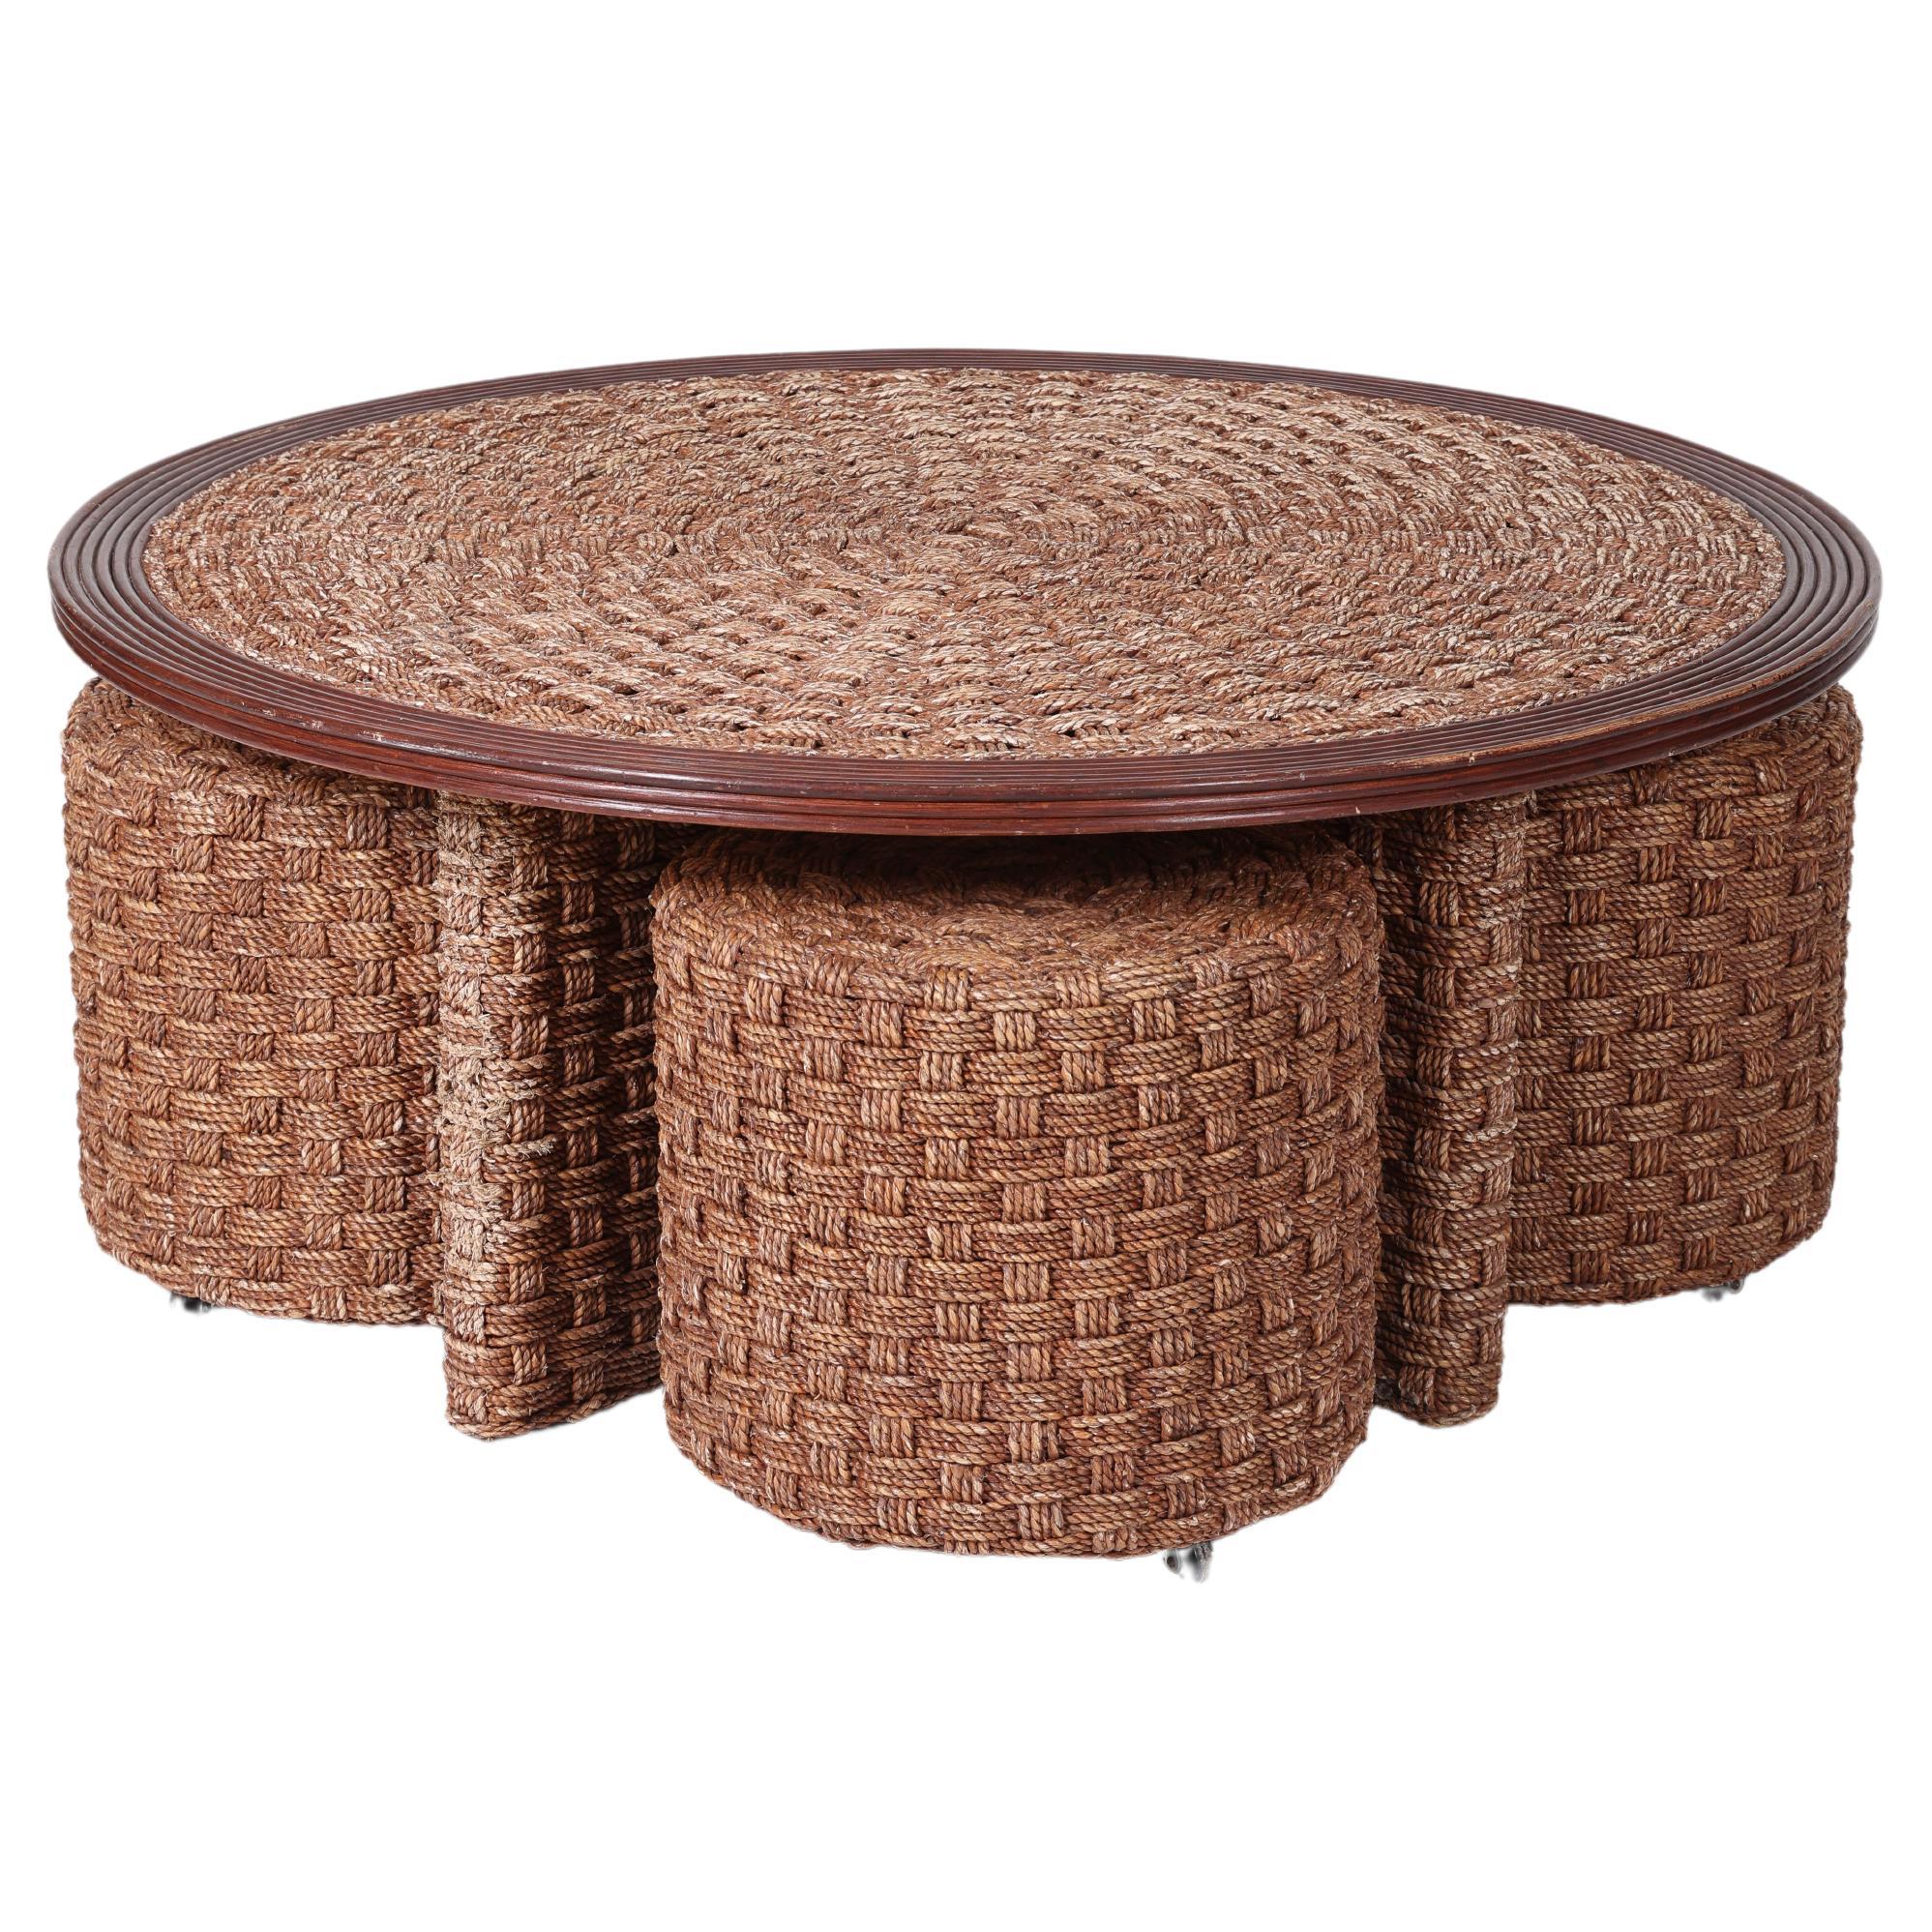 Coffee table and stools in woven rope and wood, mid-20th century